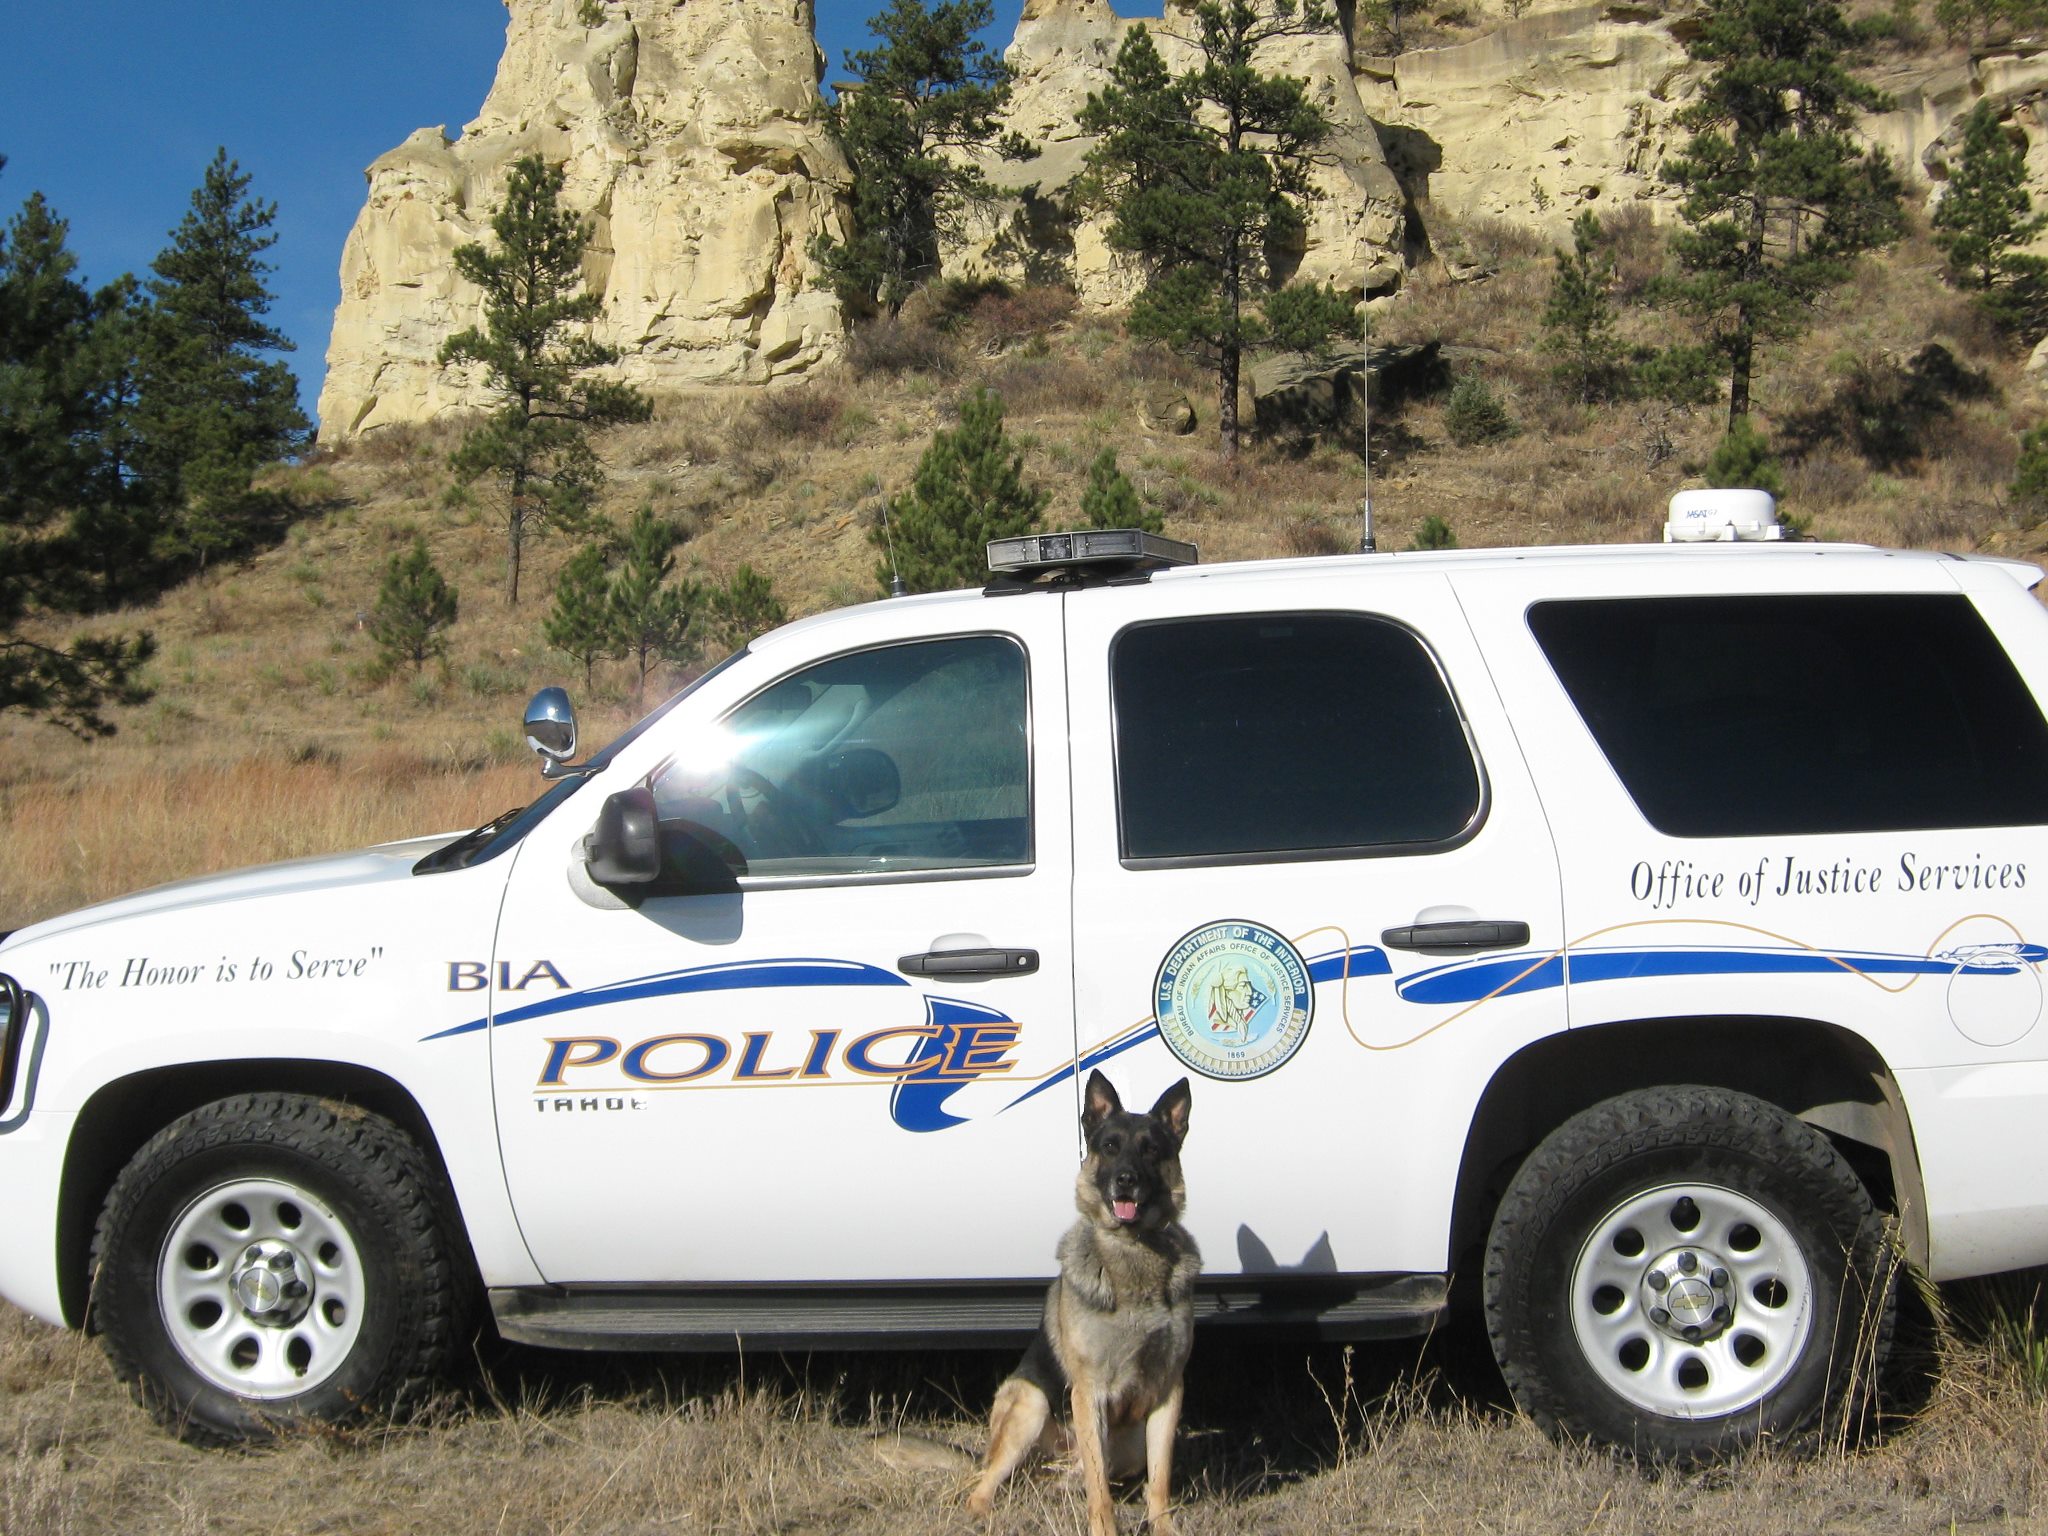 Bureau of Indian Affairs officers can't be sued for arresting non-Indian in Montana